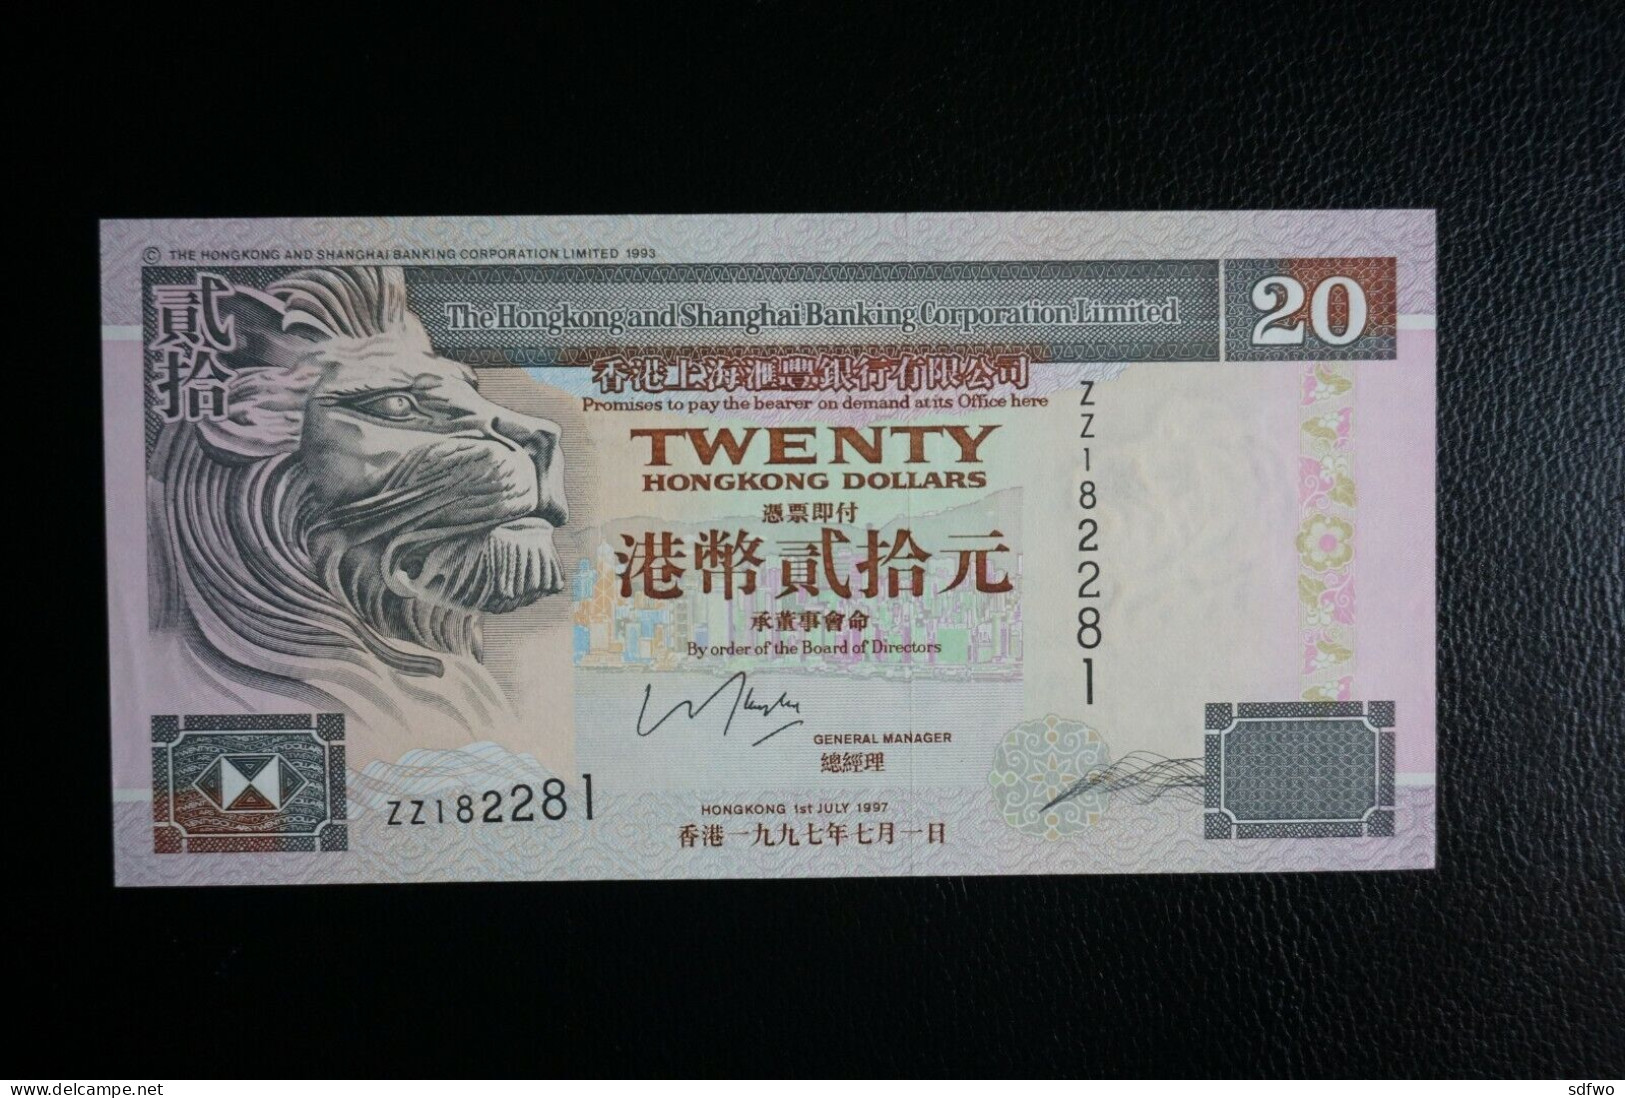 (Tv) 1997 HONG KONG OLD ISSUE - HSBC 20 DOLLARS - REPLACEMENT ISSUE #ZZ182,281 (UNC) - Hong Kong